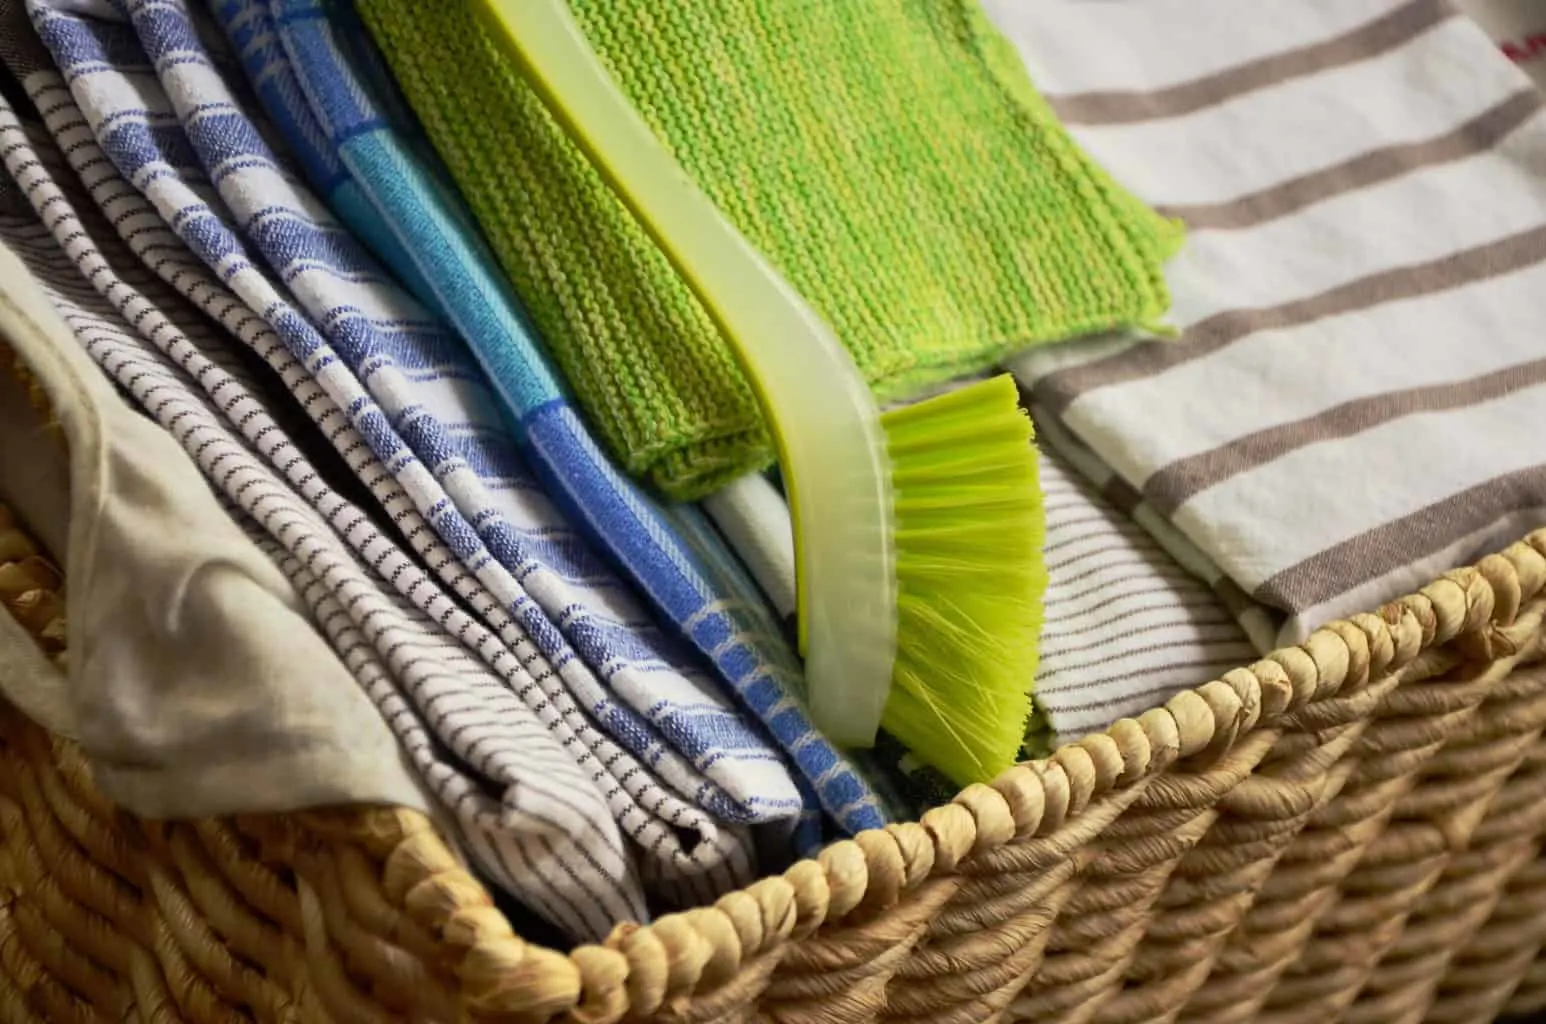 a basket of dishcloths. Follow these tips for saving money from a homesteader and get back to the basics when it comes to saving money. 